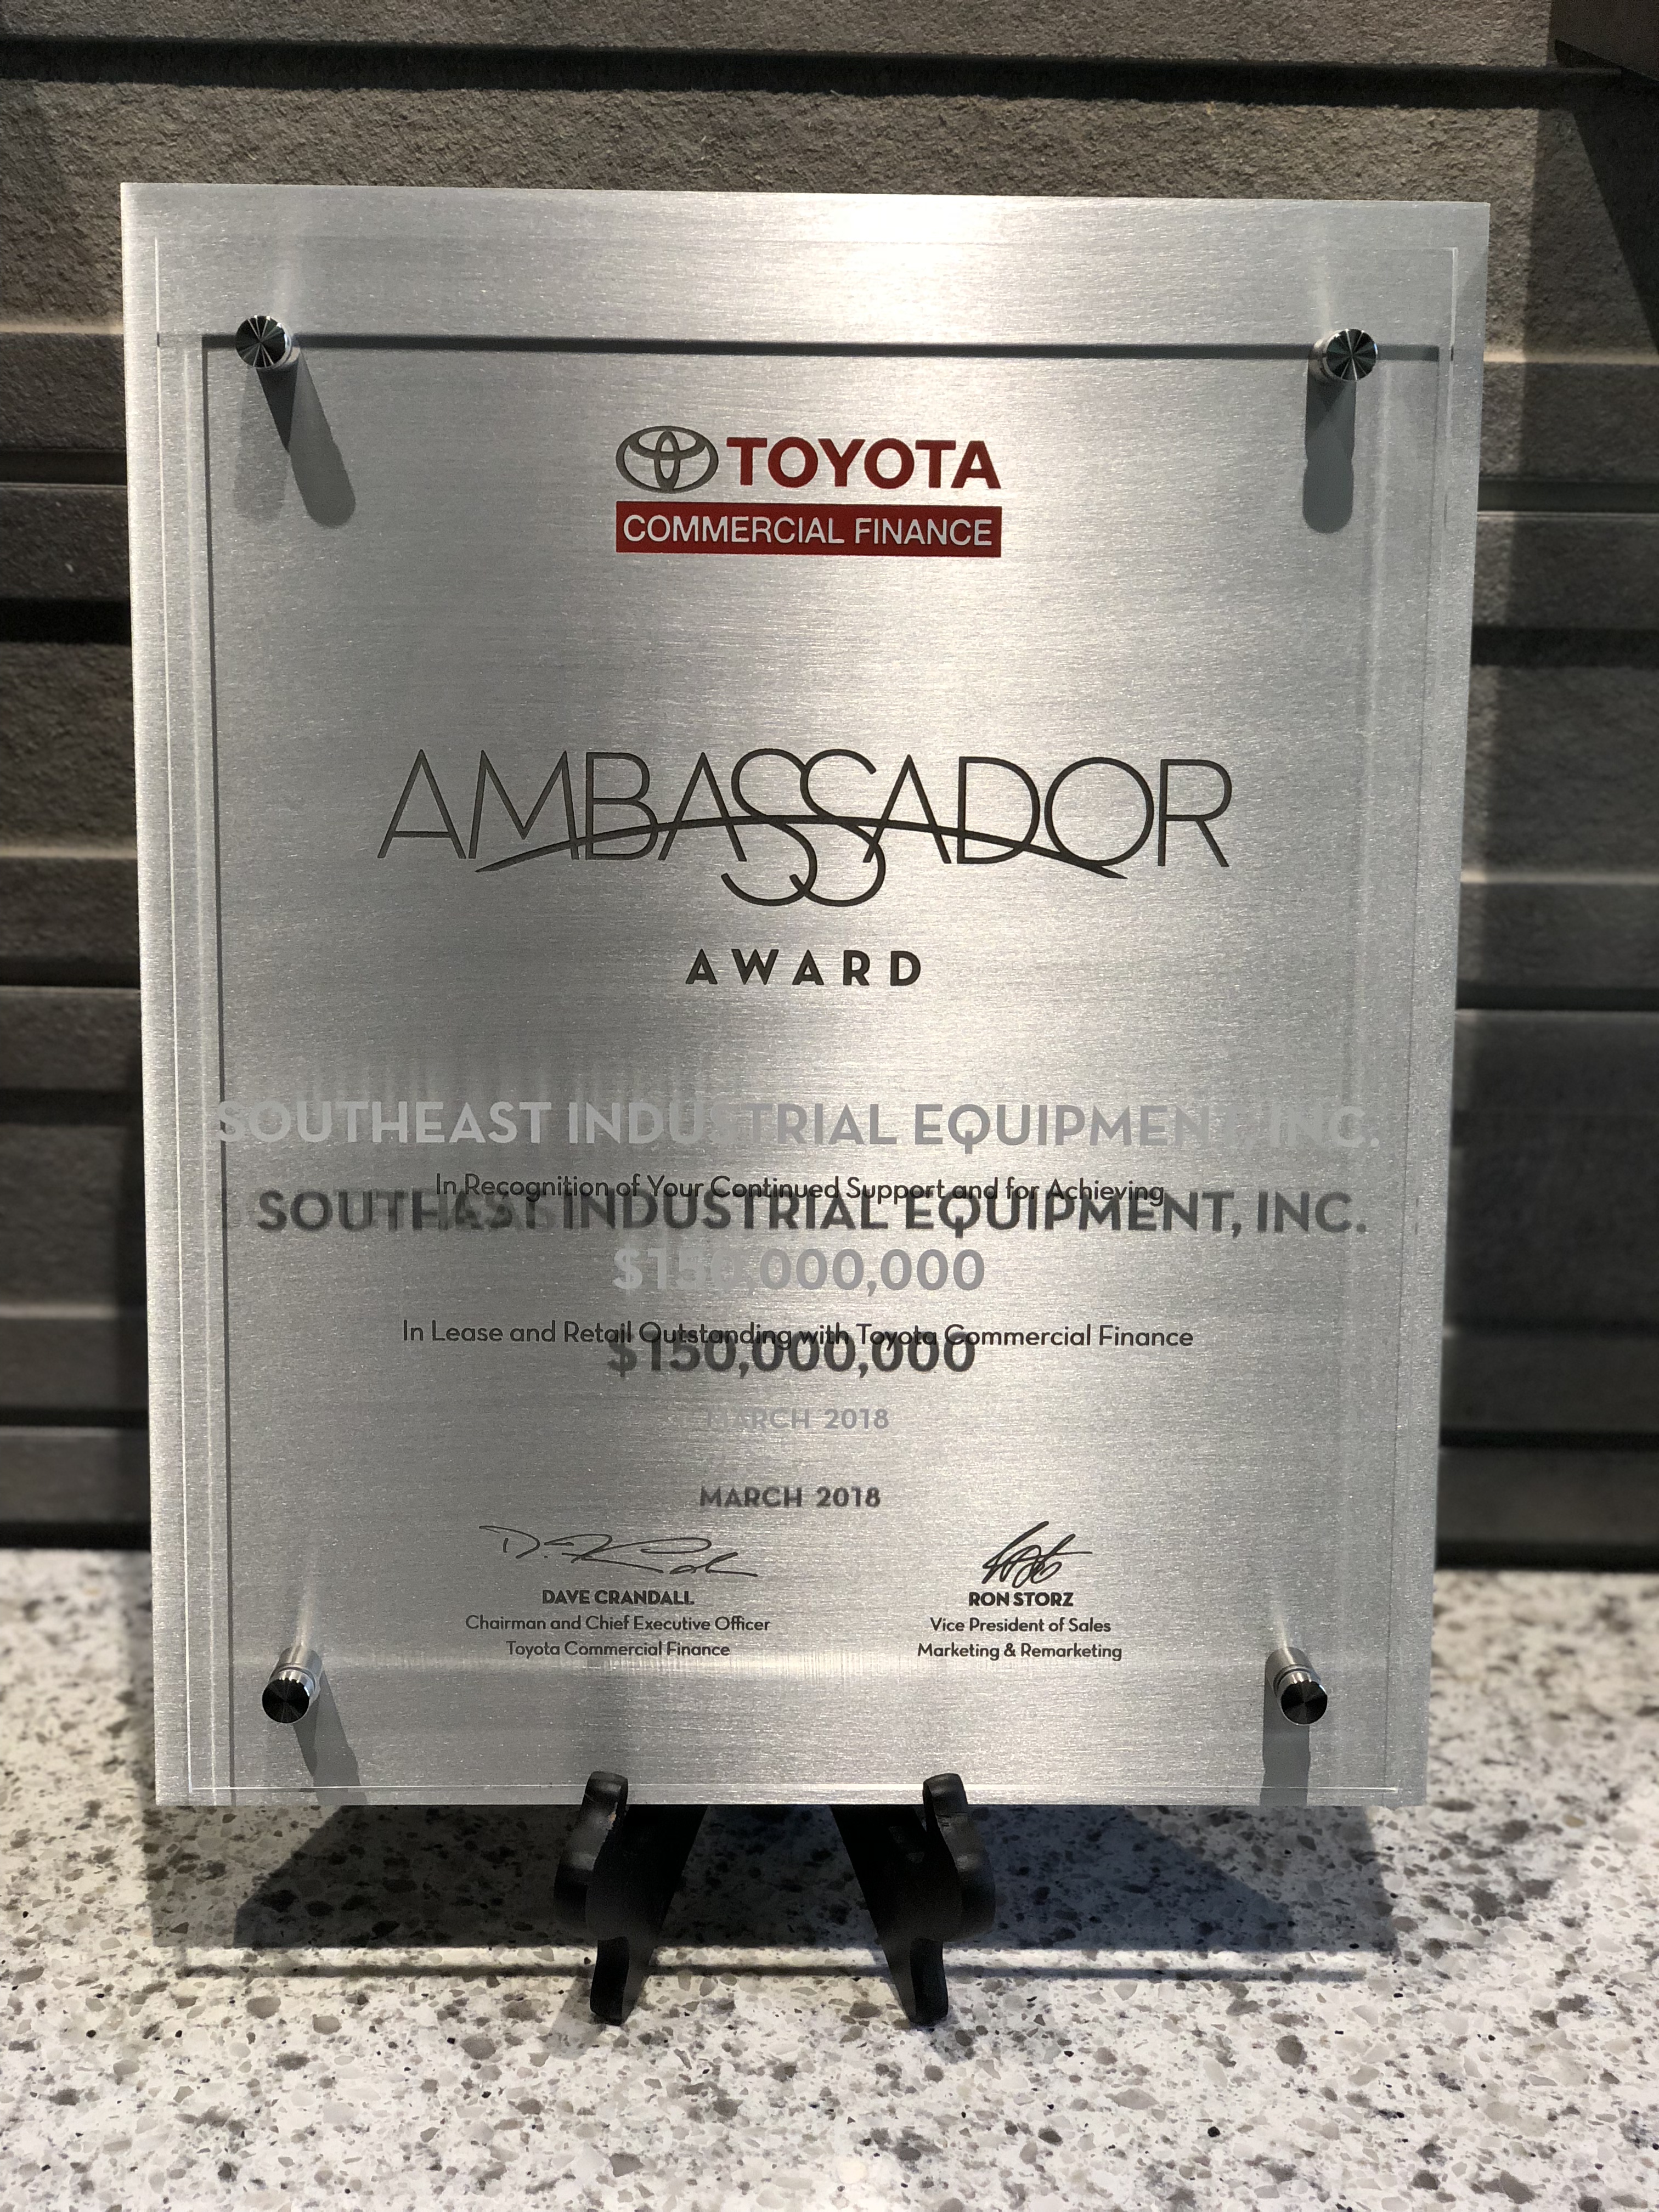 Toyota Commercial Finance Ambassador Award Won by Southeast Industrial Equipment